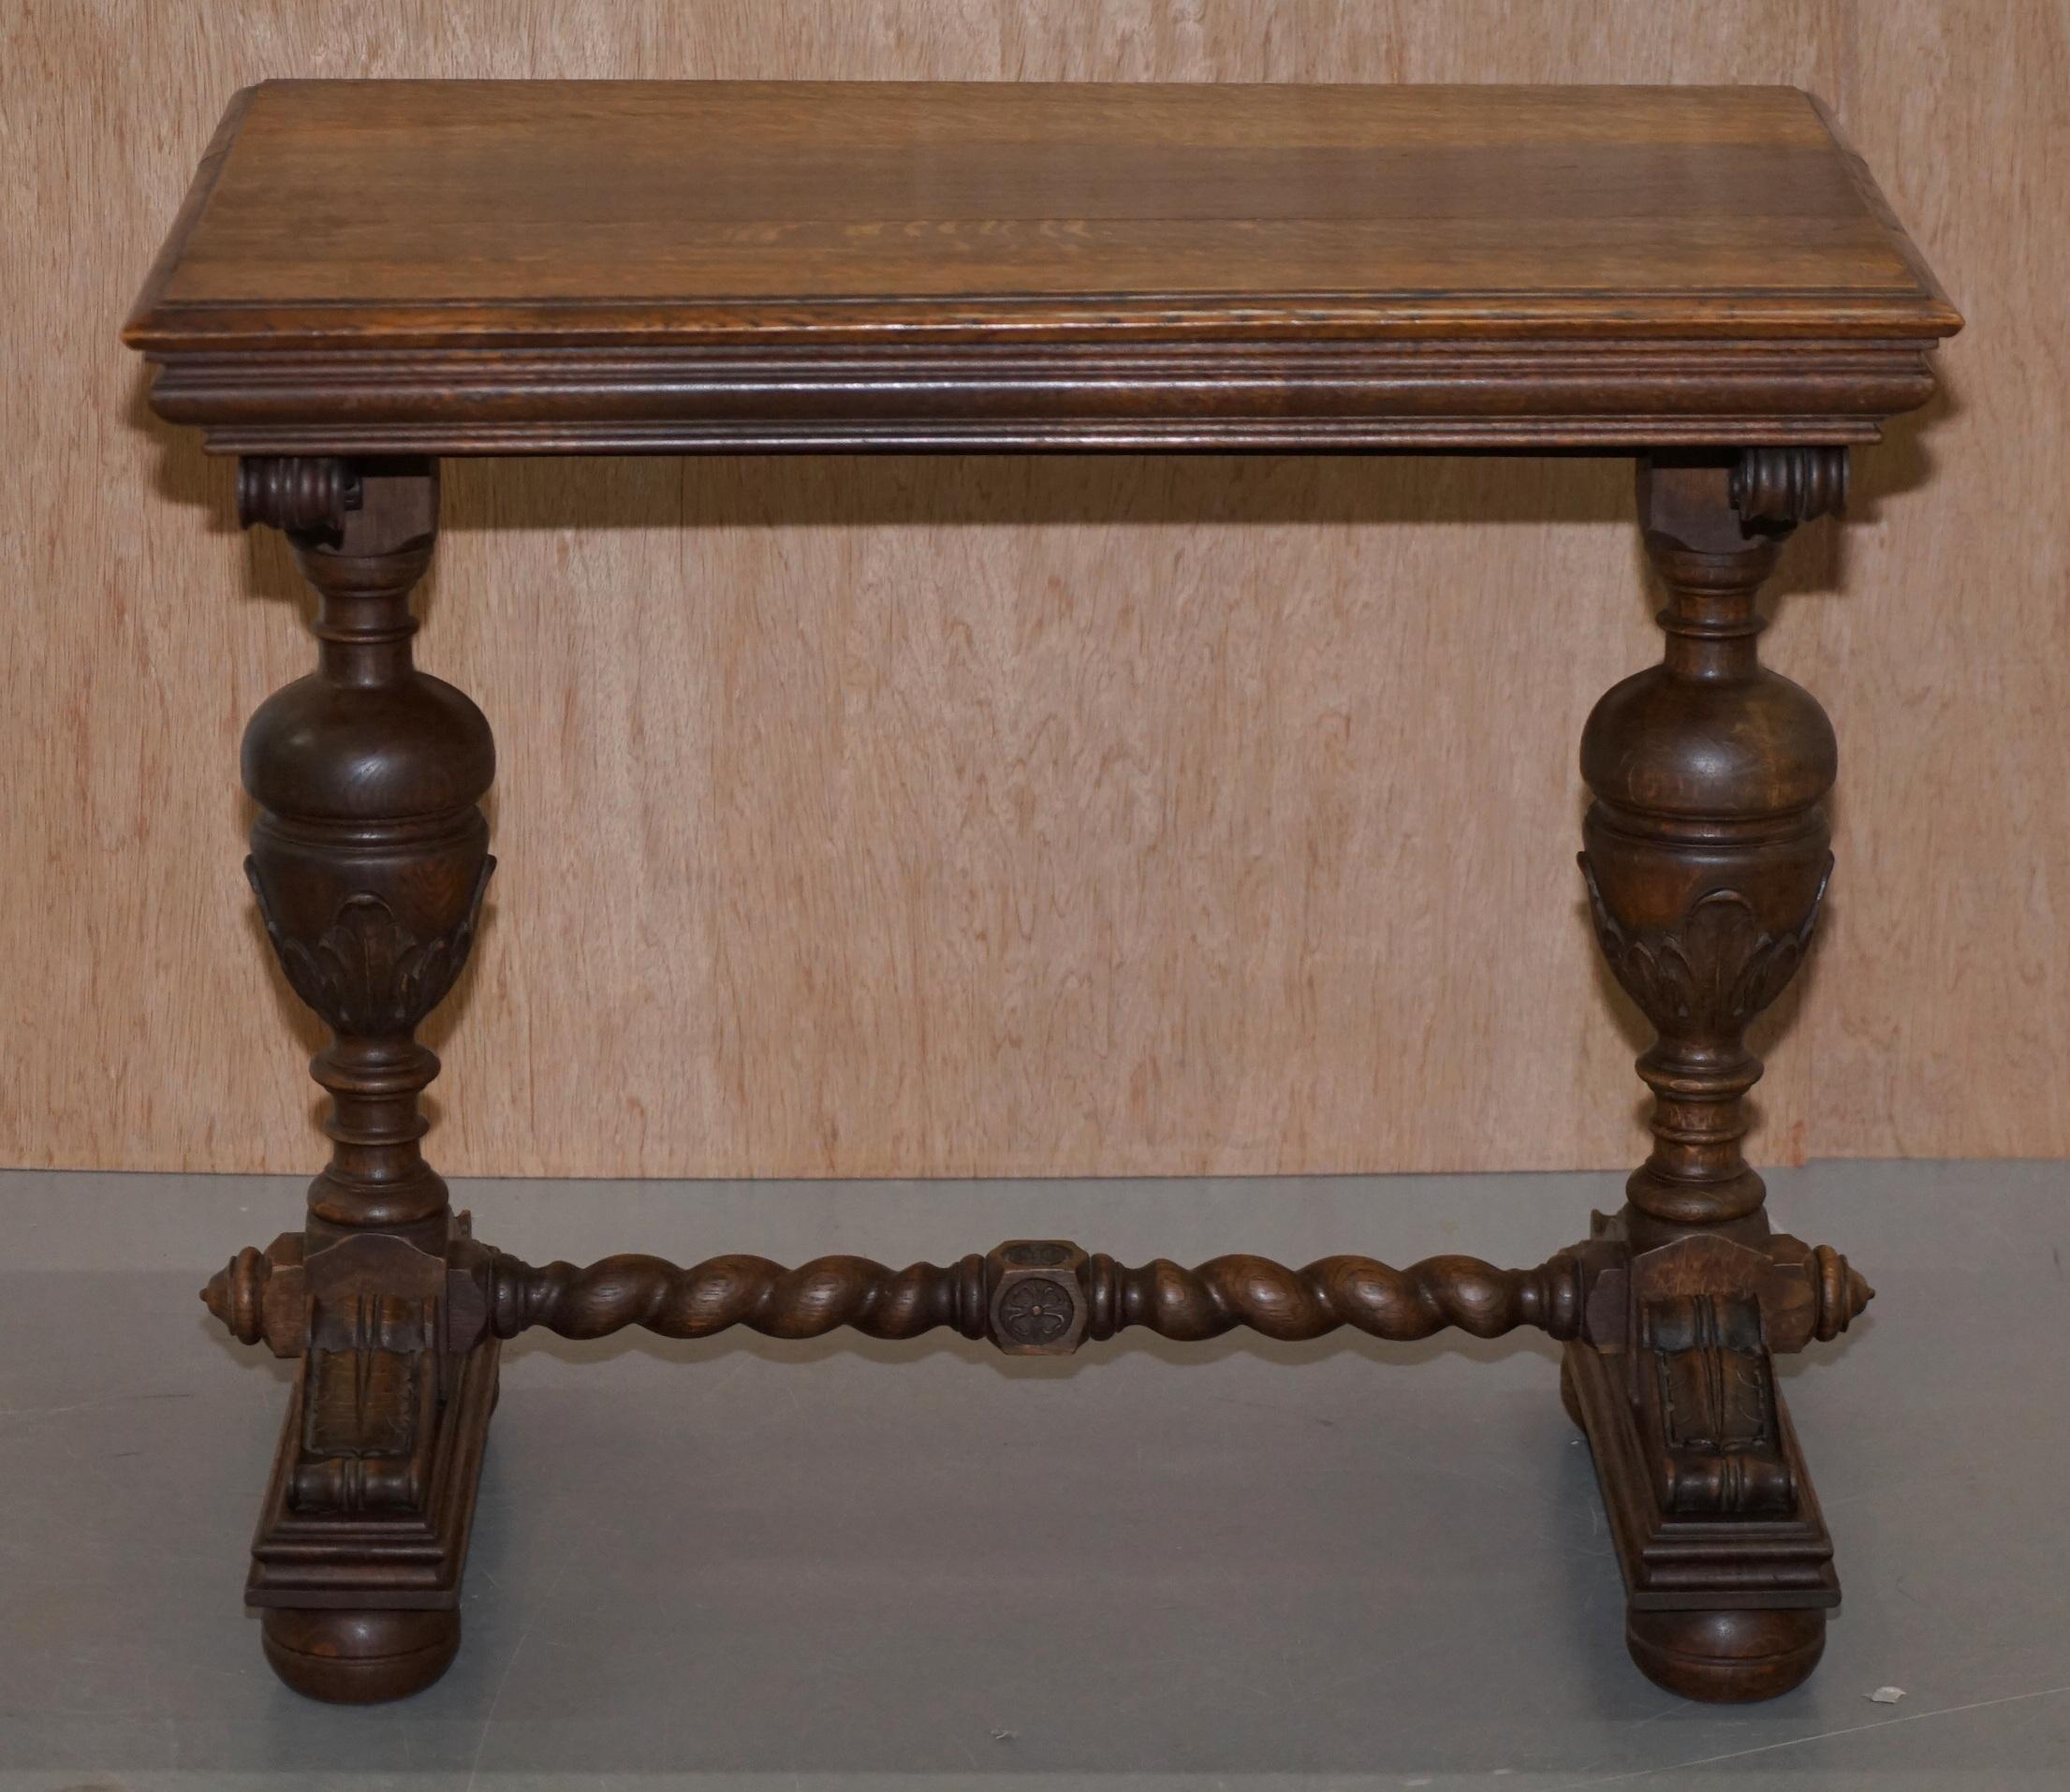 We are delighted to offer for sale this stunning hand carved solid oak Dutch side table with ornately carved base 

This set was hand made by a master craftsman in Bruges Belgium for a very successful Architect. Its part of a complete Library